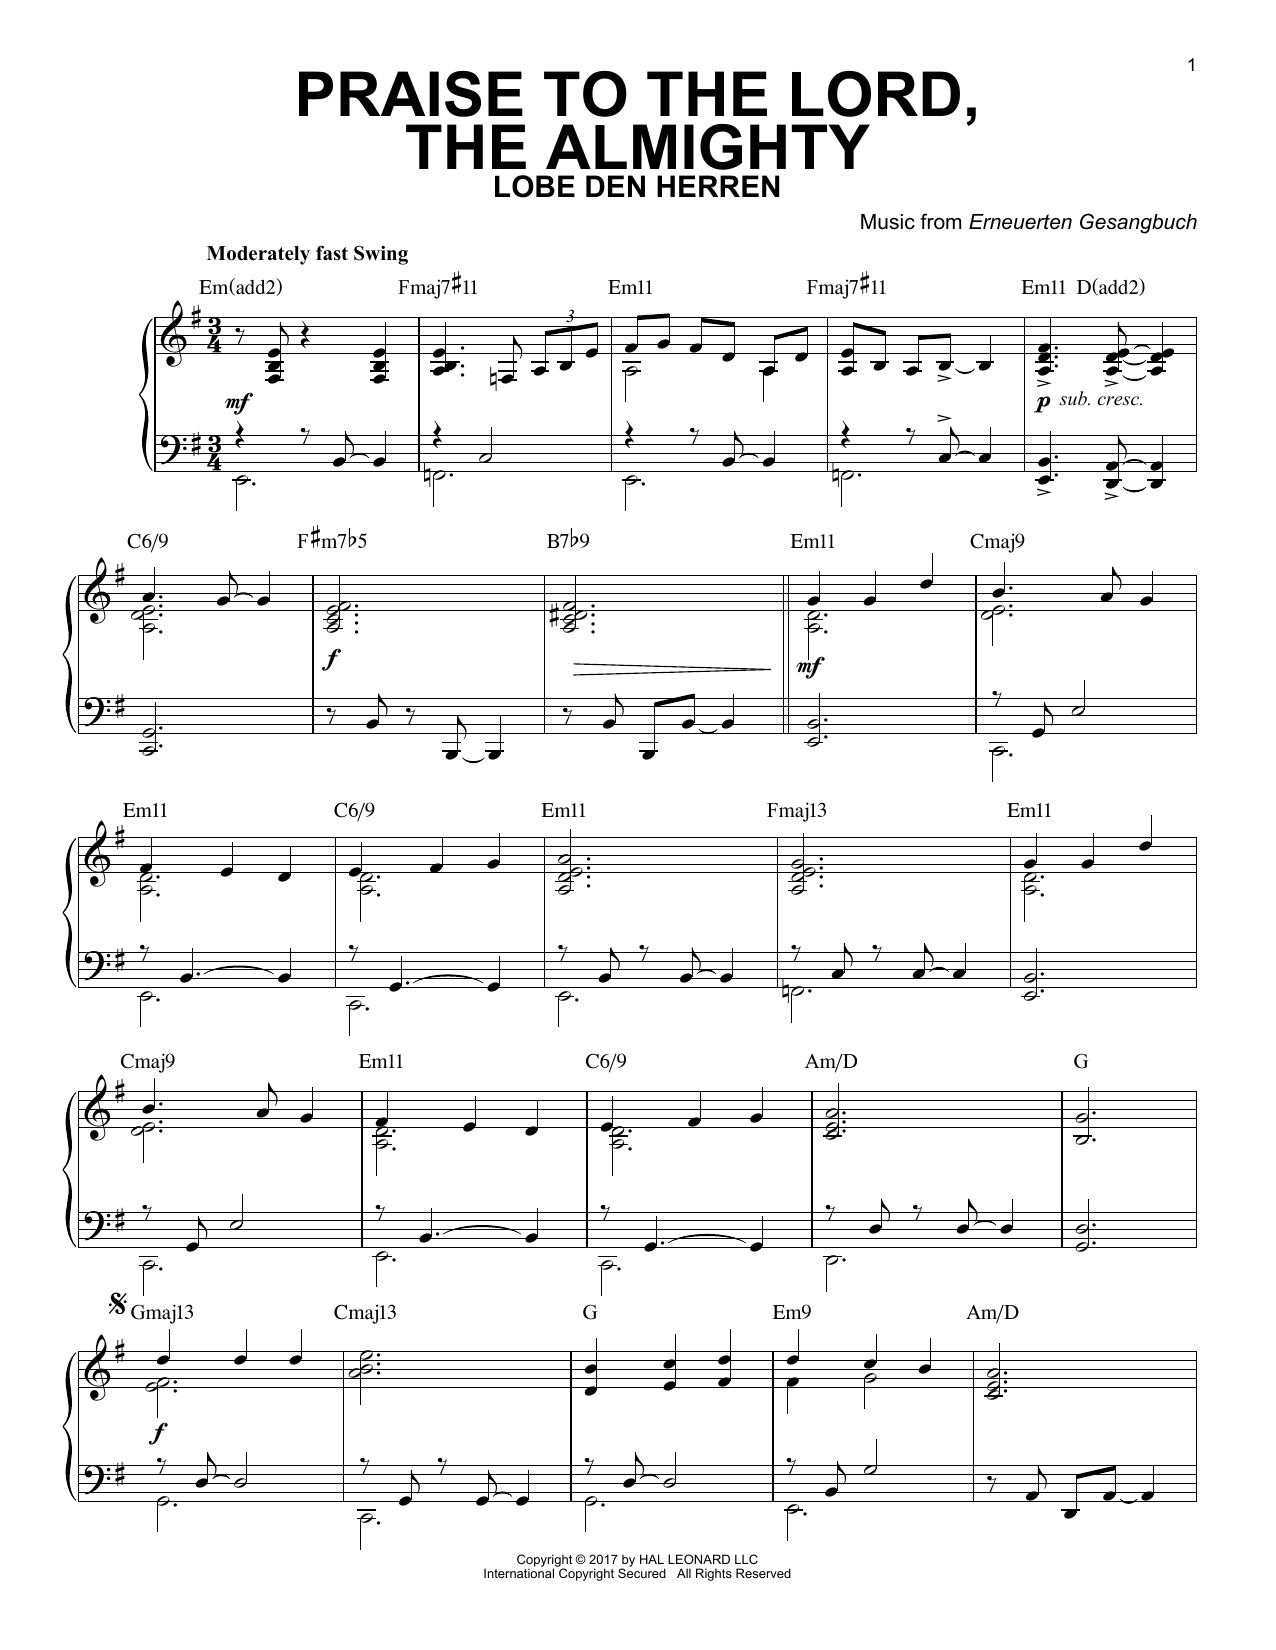 Praise To The Lord, The Almighty [Jazz version] sheet music